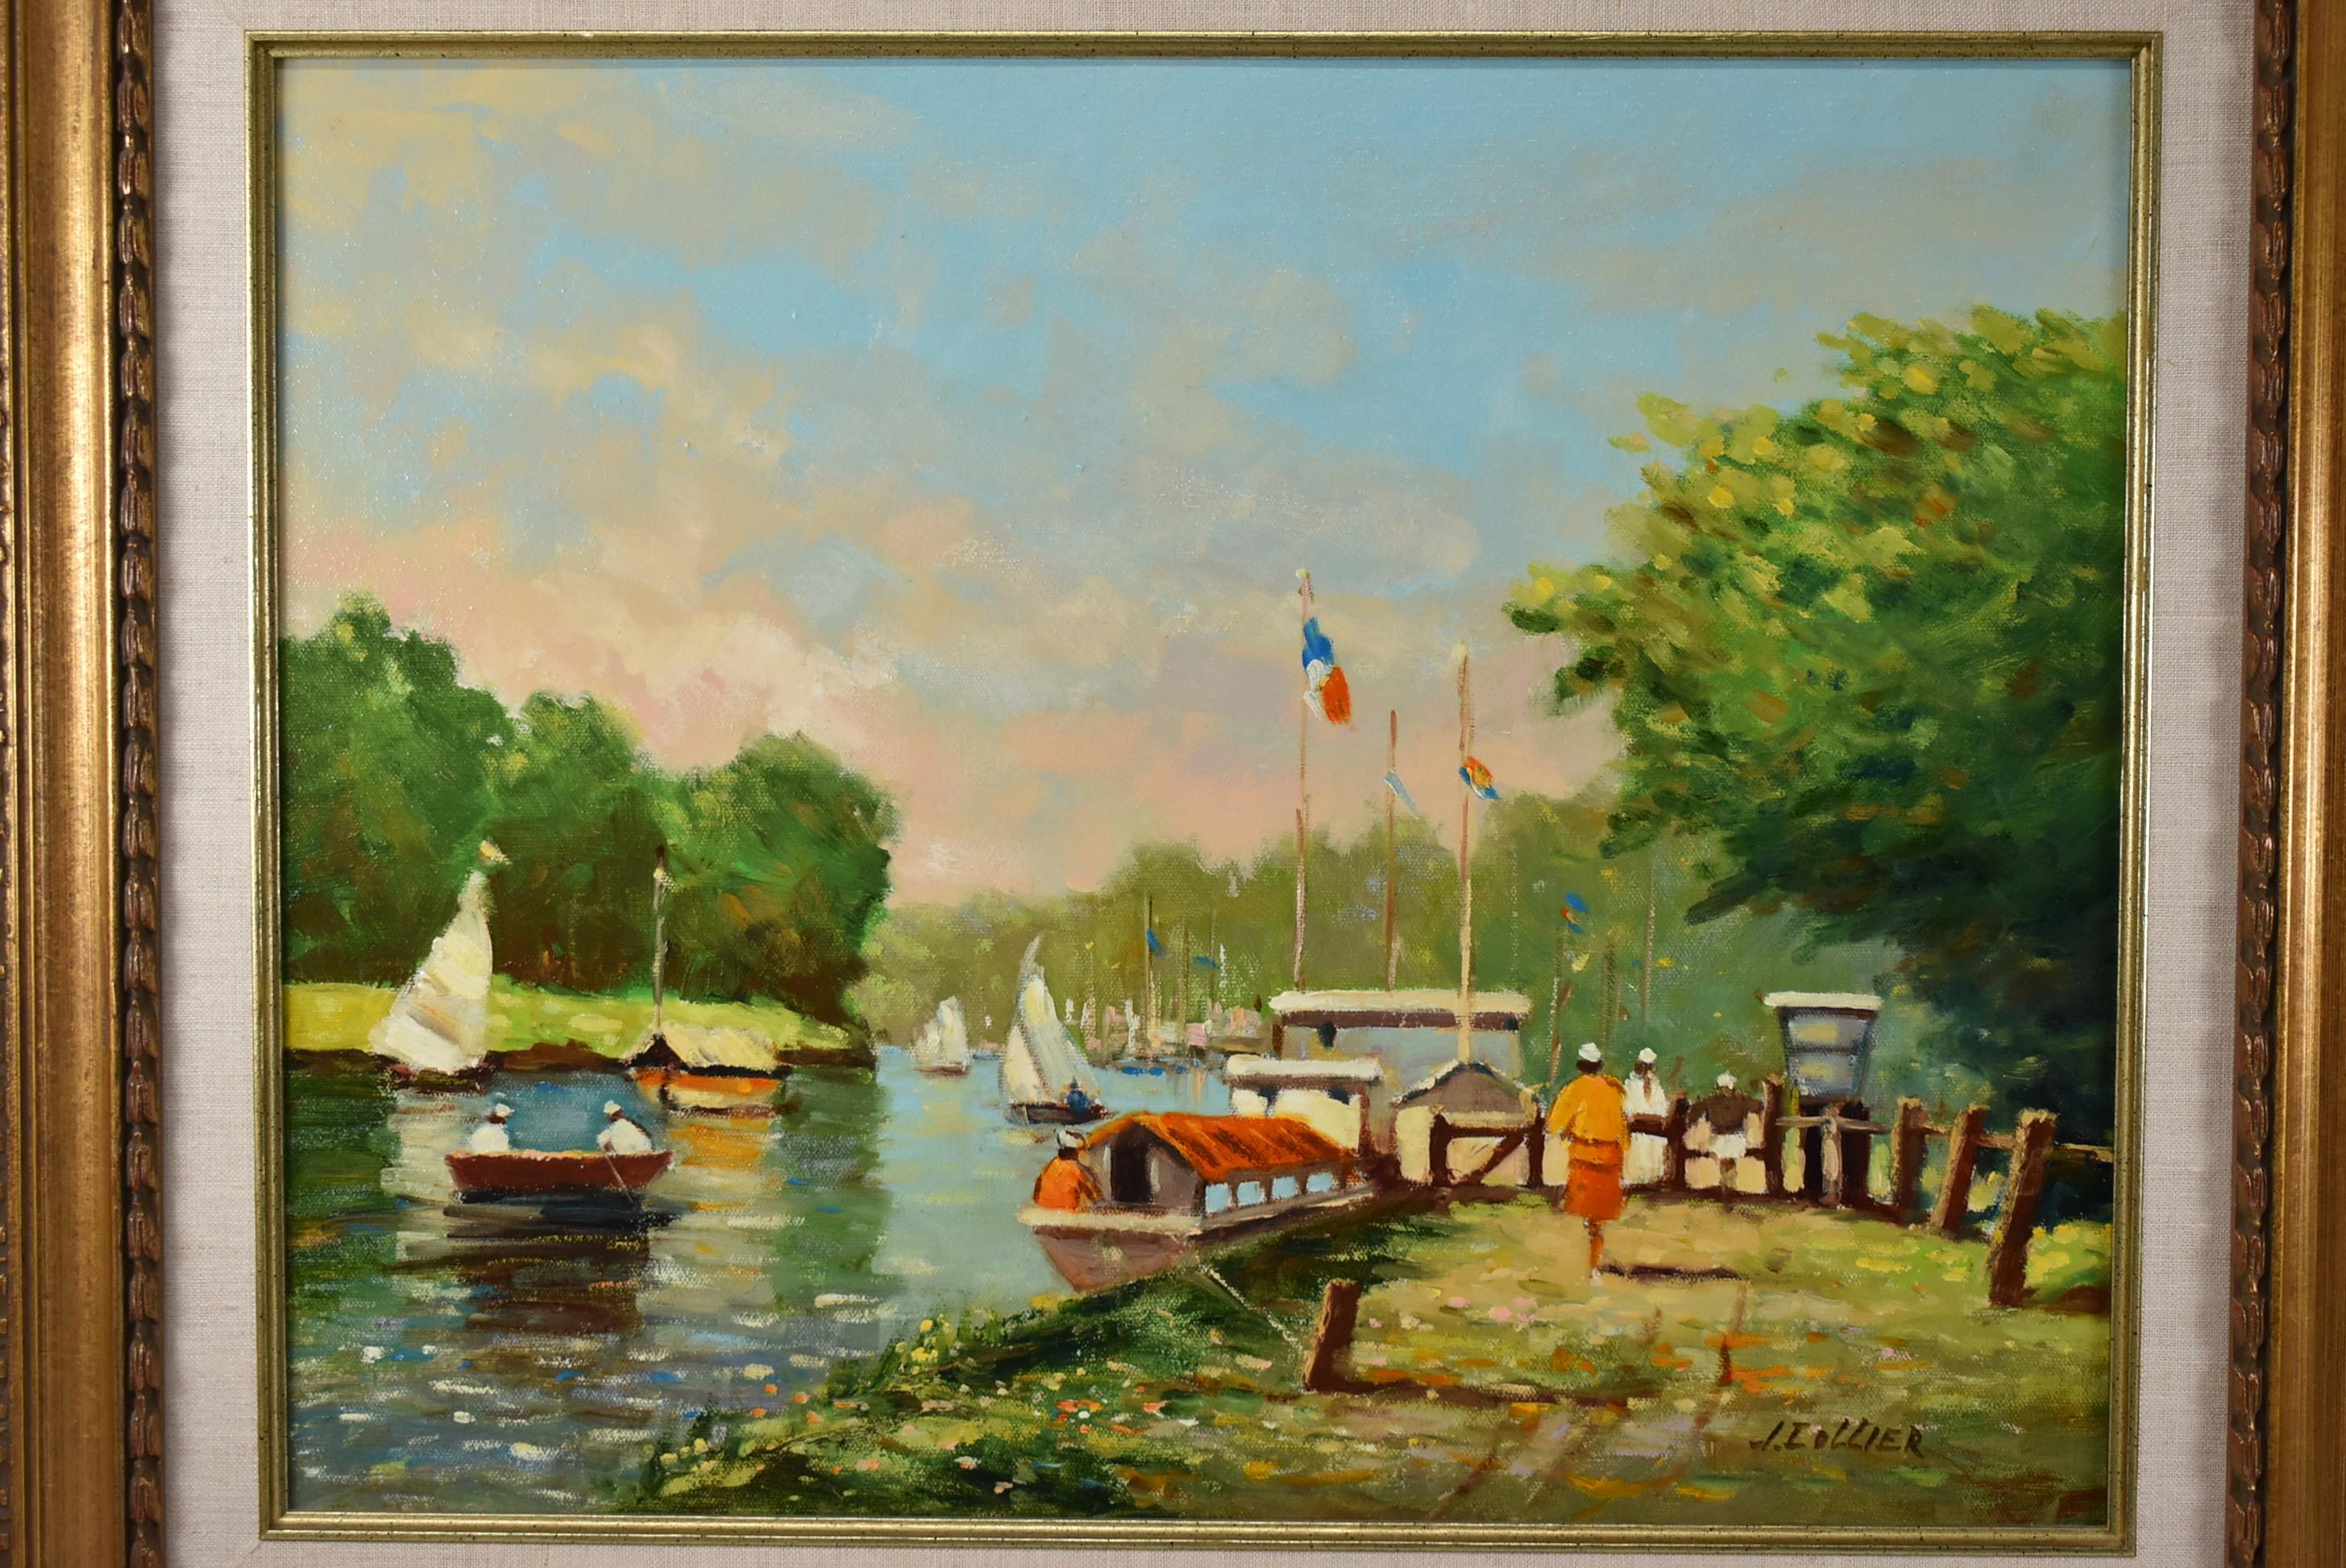 Summertime Thames river court oil painting on canvas by J. Collier. Vibrant scene with sailboats. Very nice condition. Image size measures 19.44